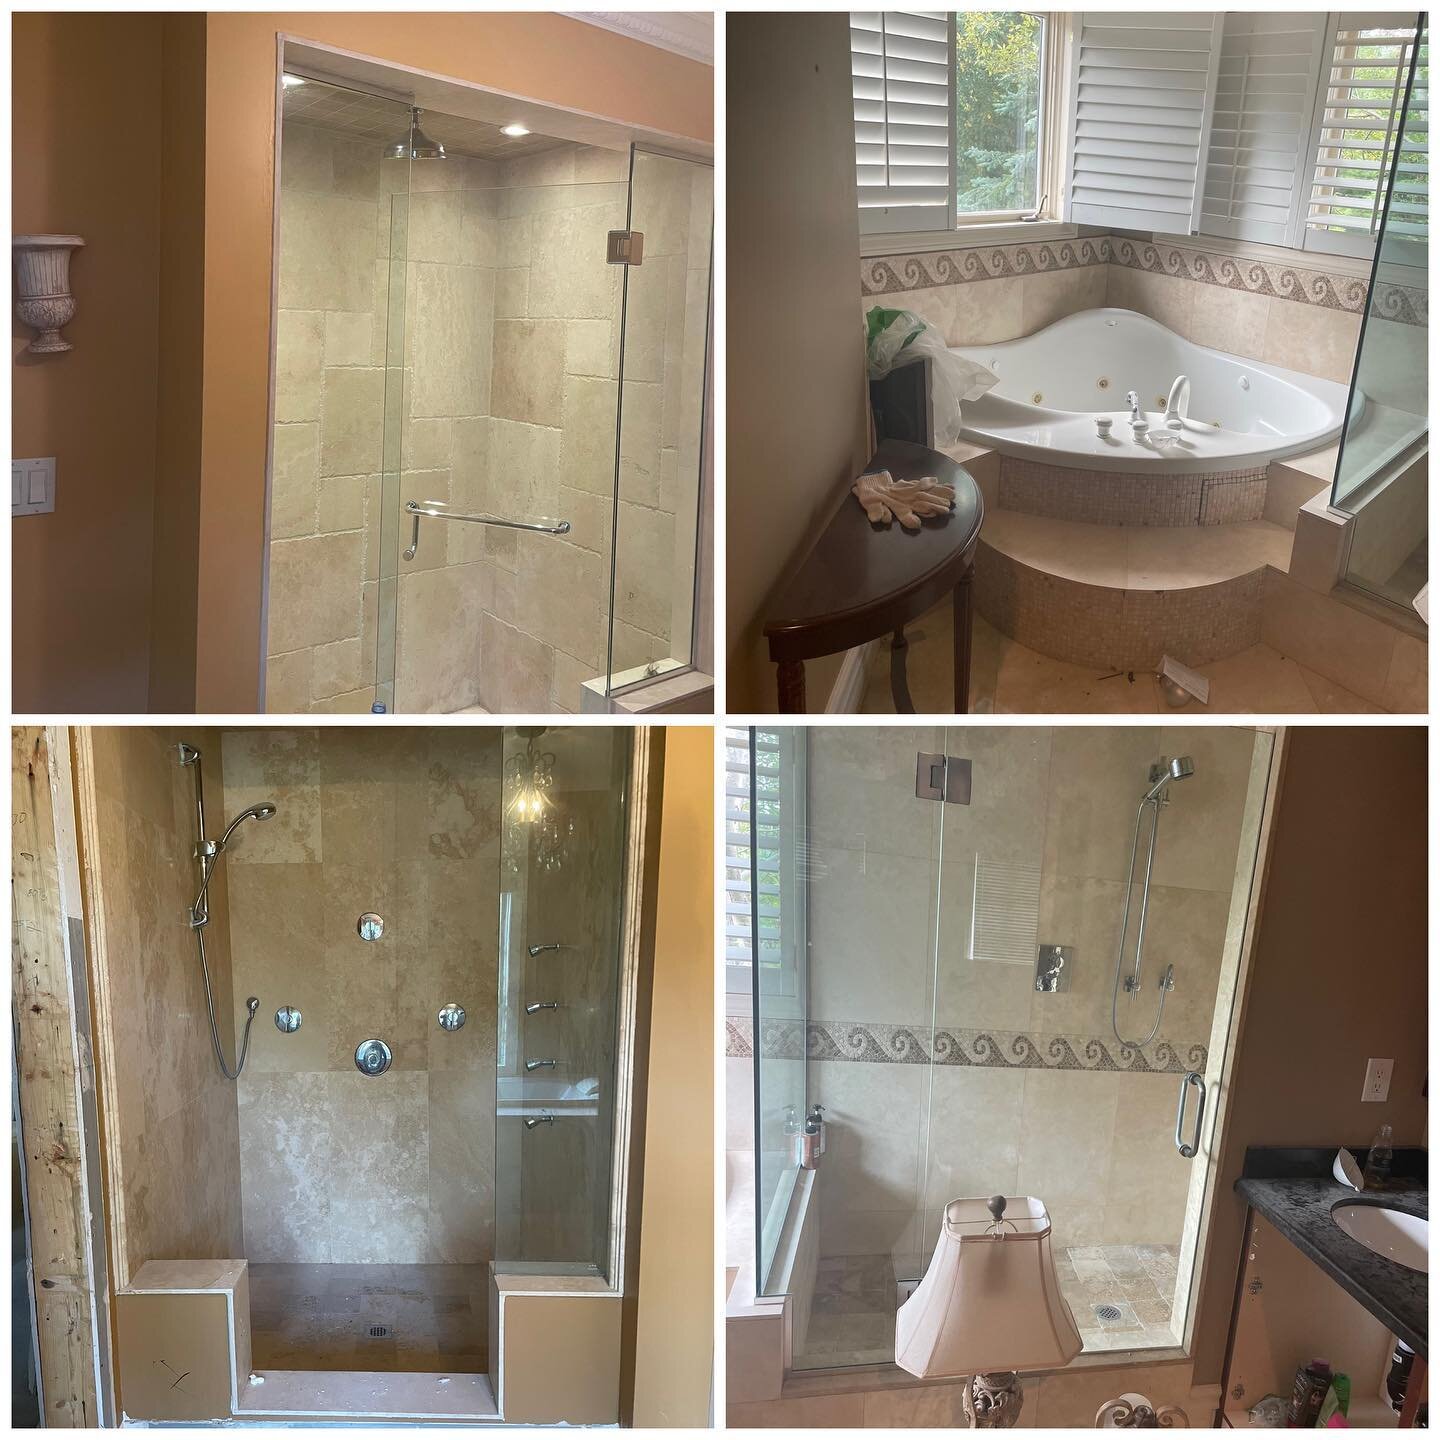 Showers and showers and showers! Just a few walk in showers and some tiles. 💪🏼 #demolition #tiles #shower #bathroom #renovations #reno #tile #renovation #hamilton #torontorelator #torontorealestate #burlingtonrealestate #hamiltonrealestate #hamilto